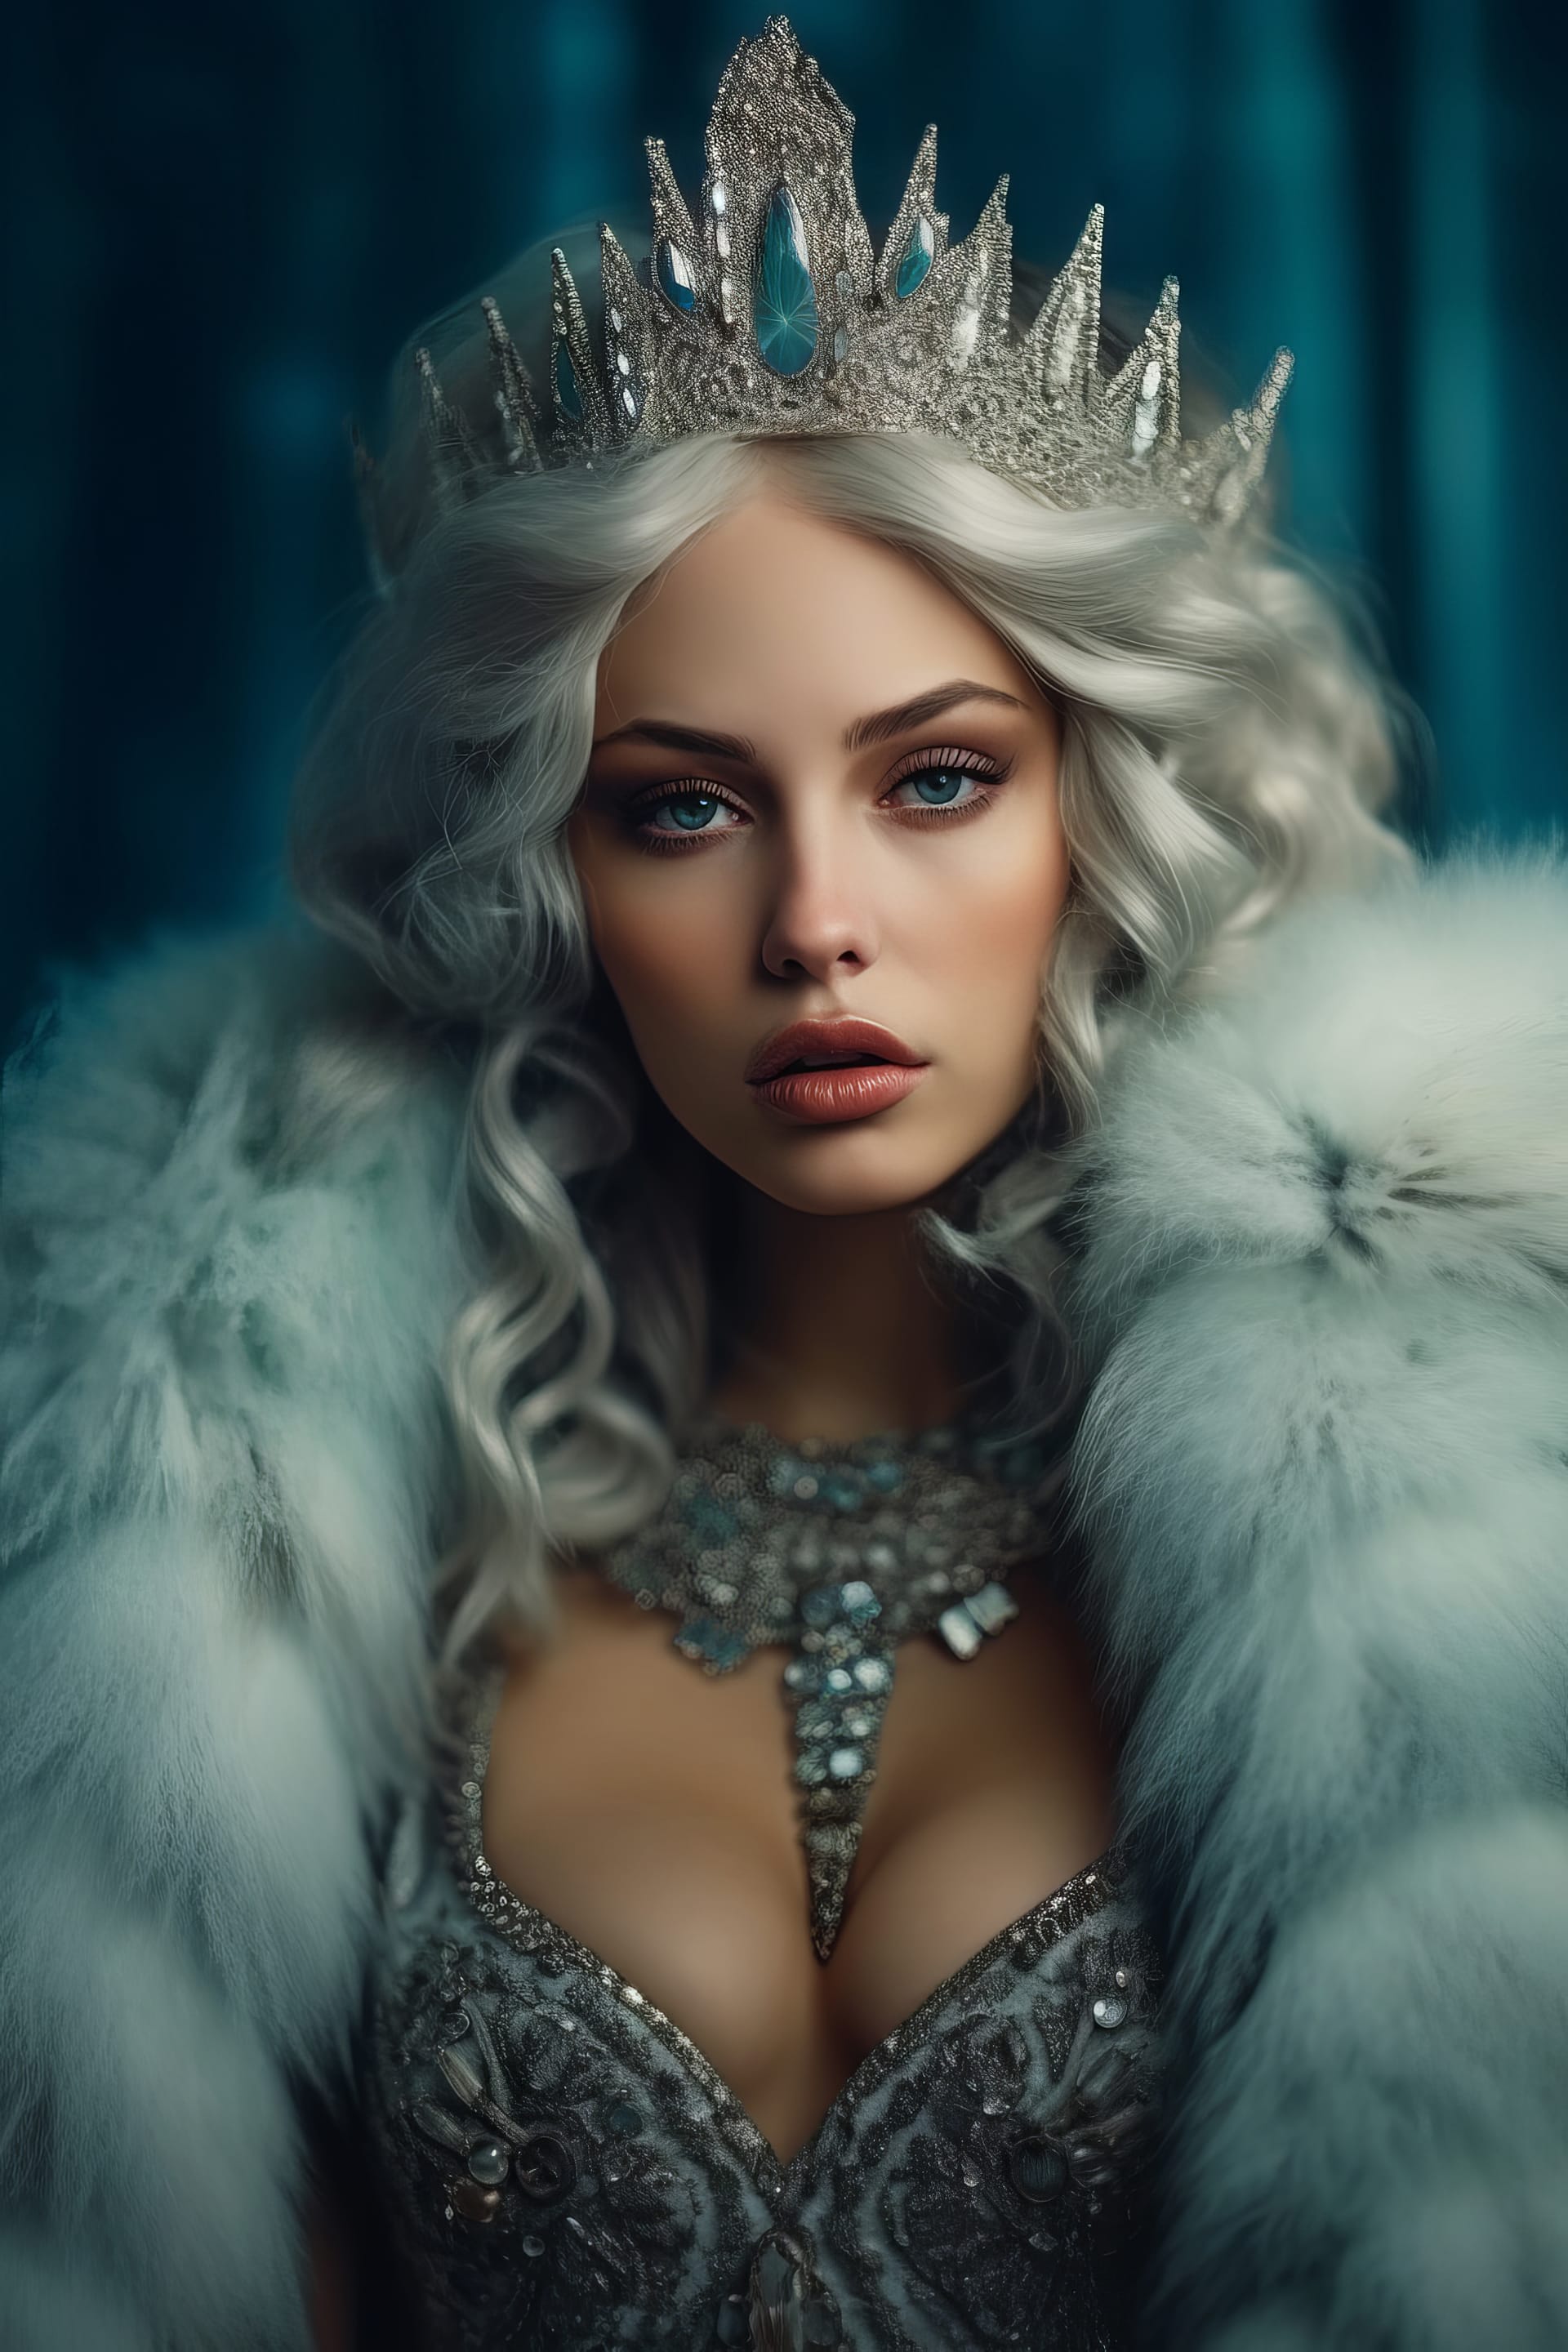 Evocative artwork portraiture beautiful woman with crown on her head